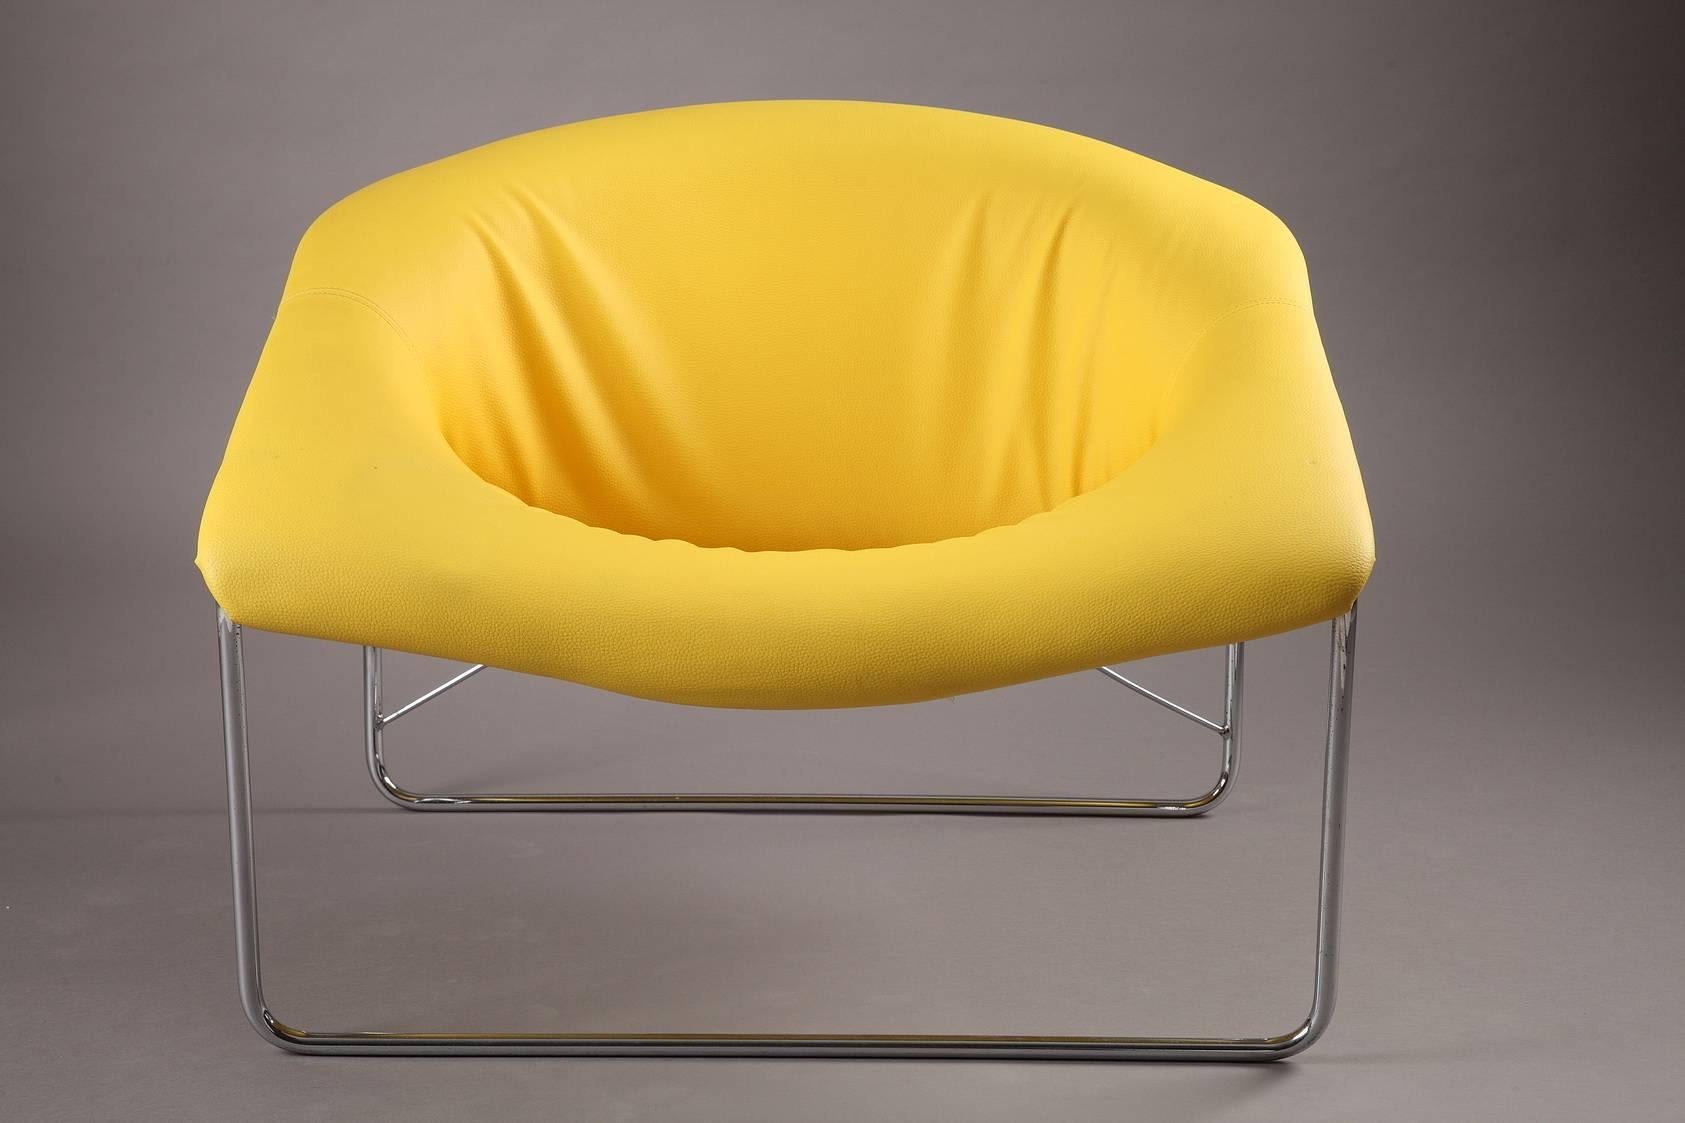 Cubique chair with steel frame and yellow leather-like basis. Designed by Olivier Mourgue in 1968 for Airborne International, France,

circa 1968
Dimension: W 32.3 in, D 29.9in, H 24.8in.
Dimension: L 82cm, P 76cm, H 63cm.

Literature
Olivier